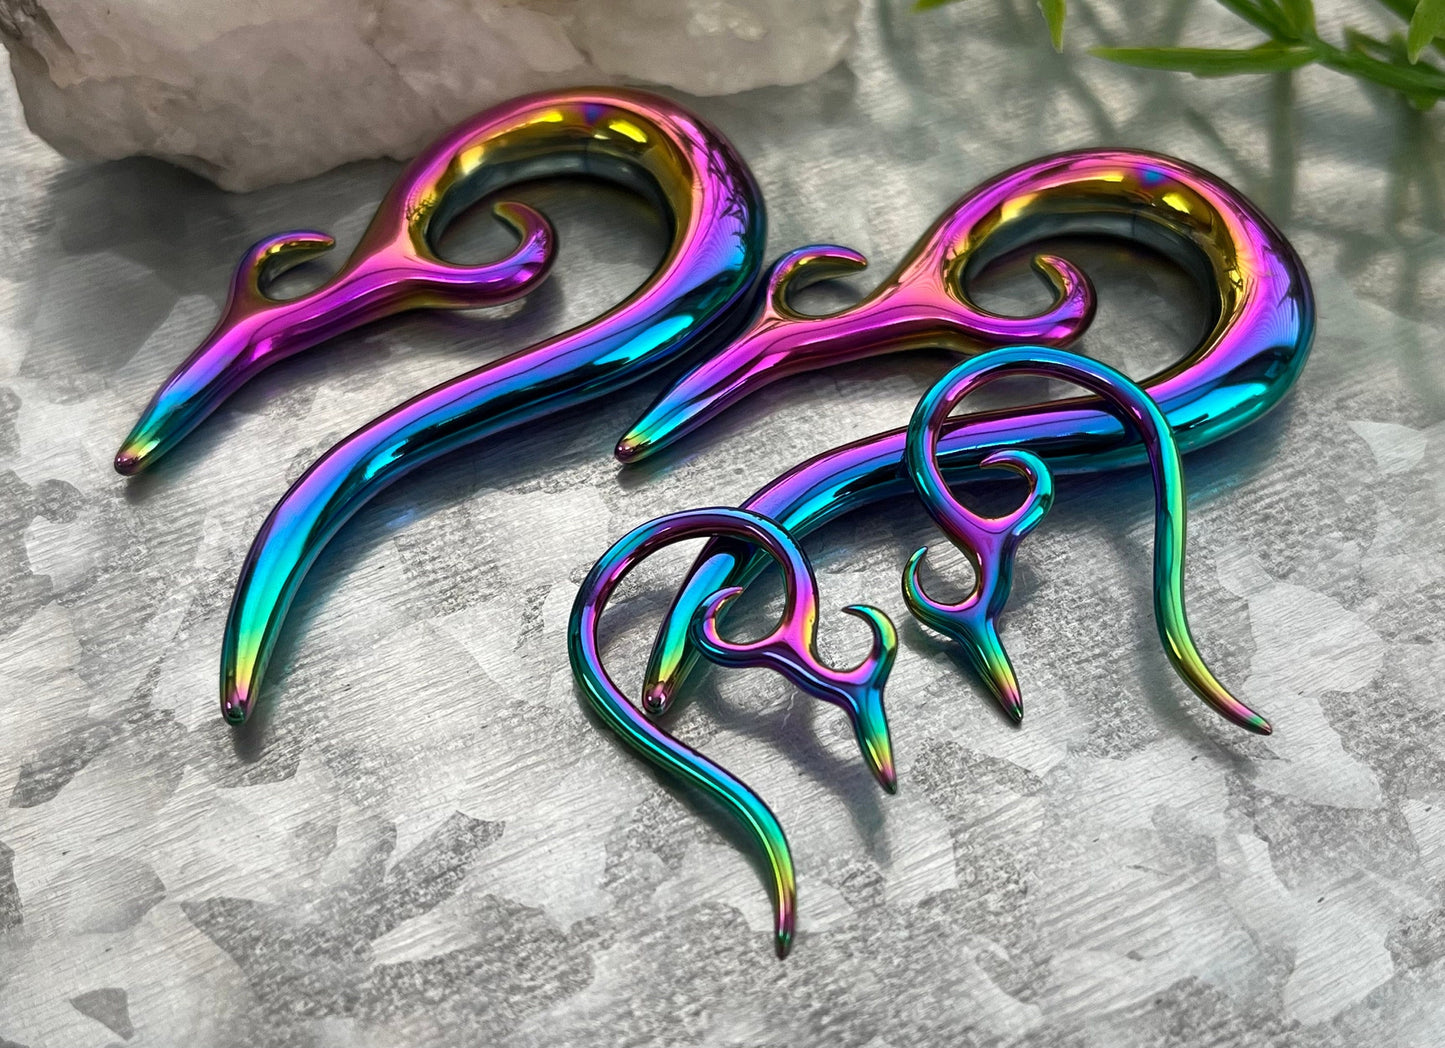 PAIR of Unusual Rainbow Tribal 316L Surgical Steel Hanging Tapers Expanders - Gauges 12g (2mm) thru 0g (8mm) Available!